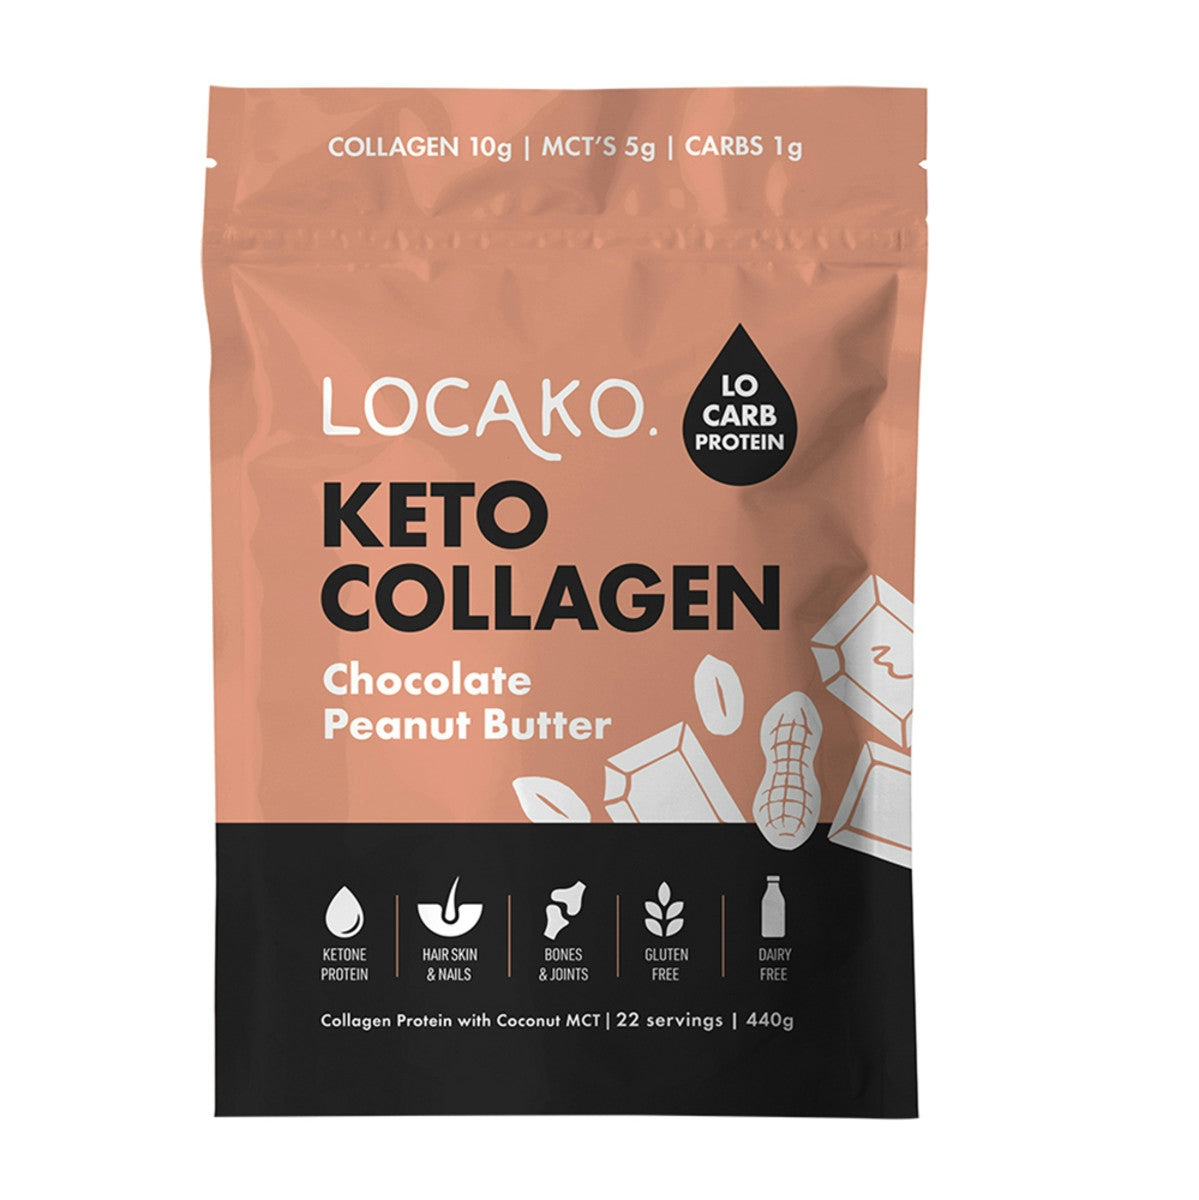 image of Locako Keto Collagen Chocolate Peanut Butter (Collagen Protein with Coconut MCT) 440g on white background 